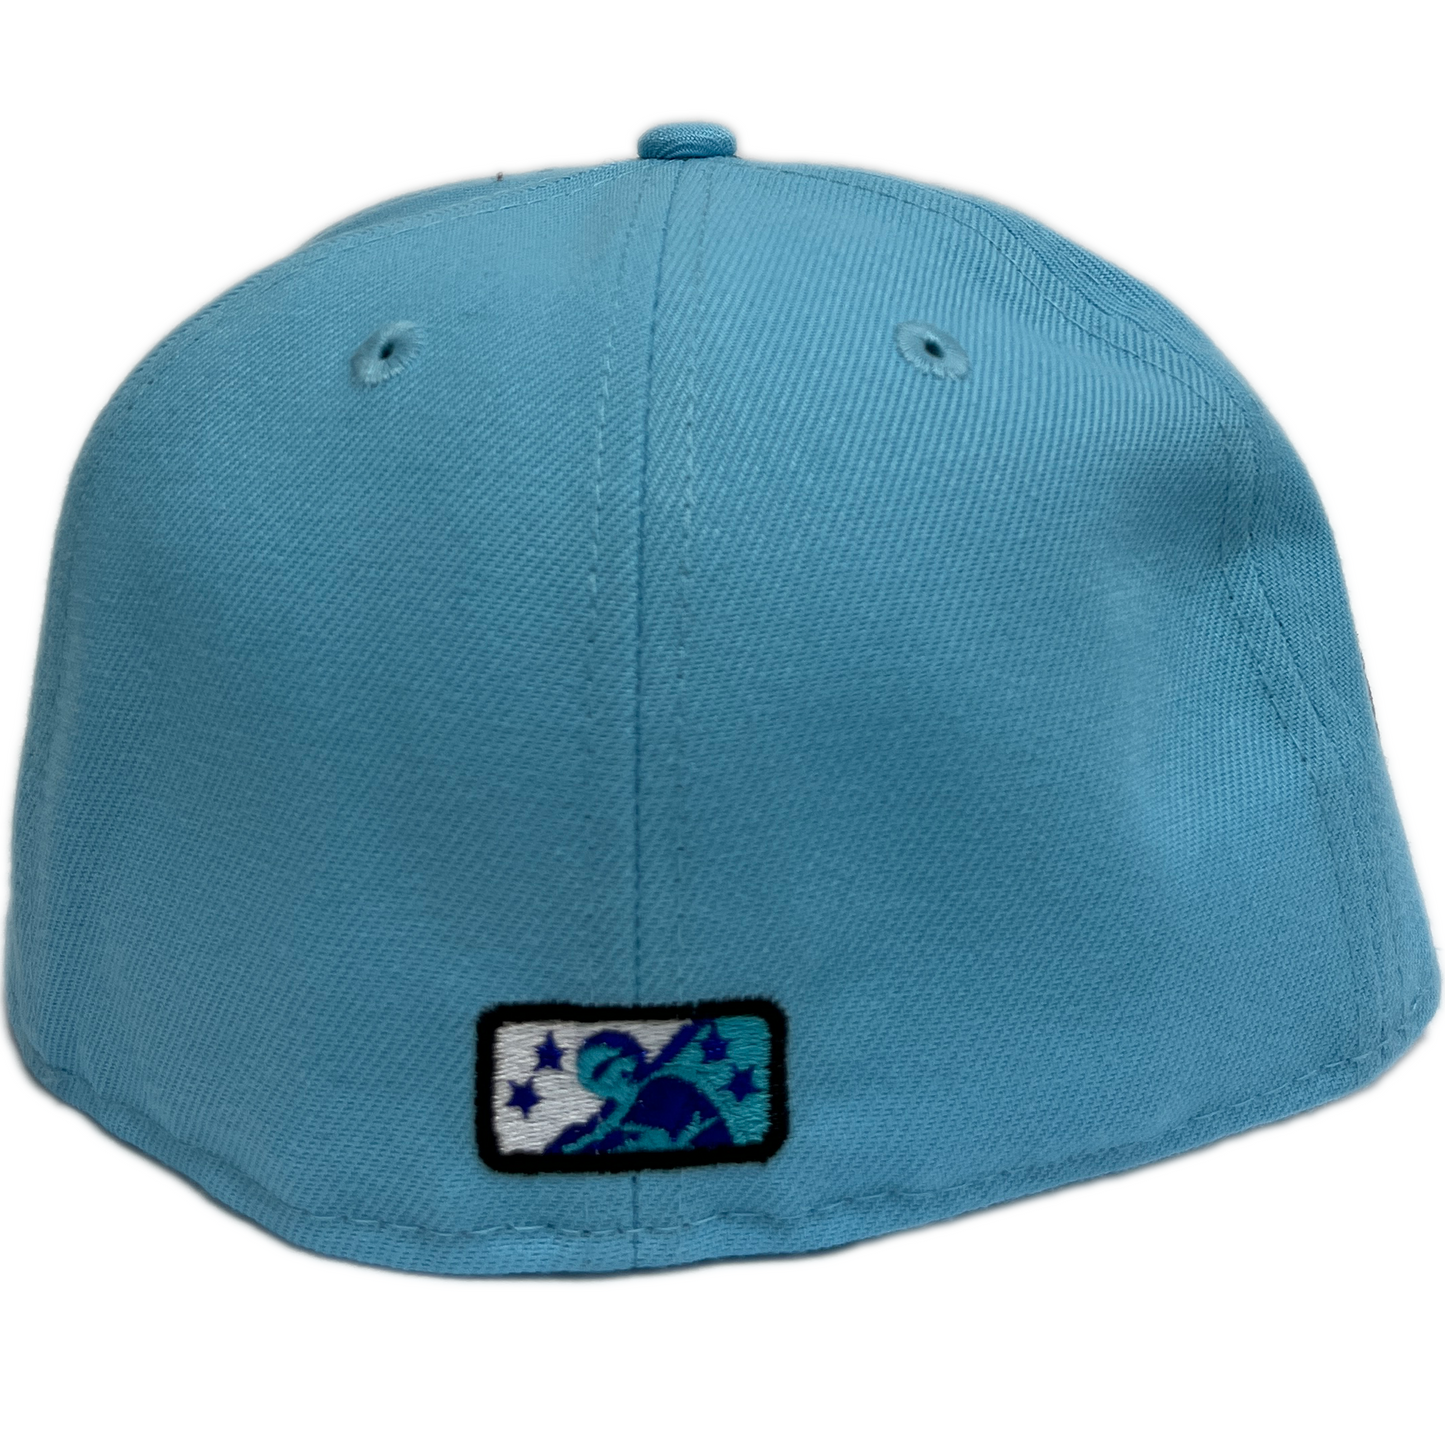 New Era Daytona Tortugas 59Fifty Fitted Hat - Blue/ Brown